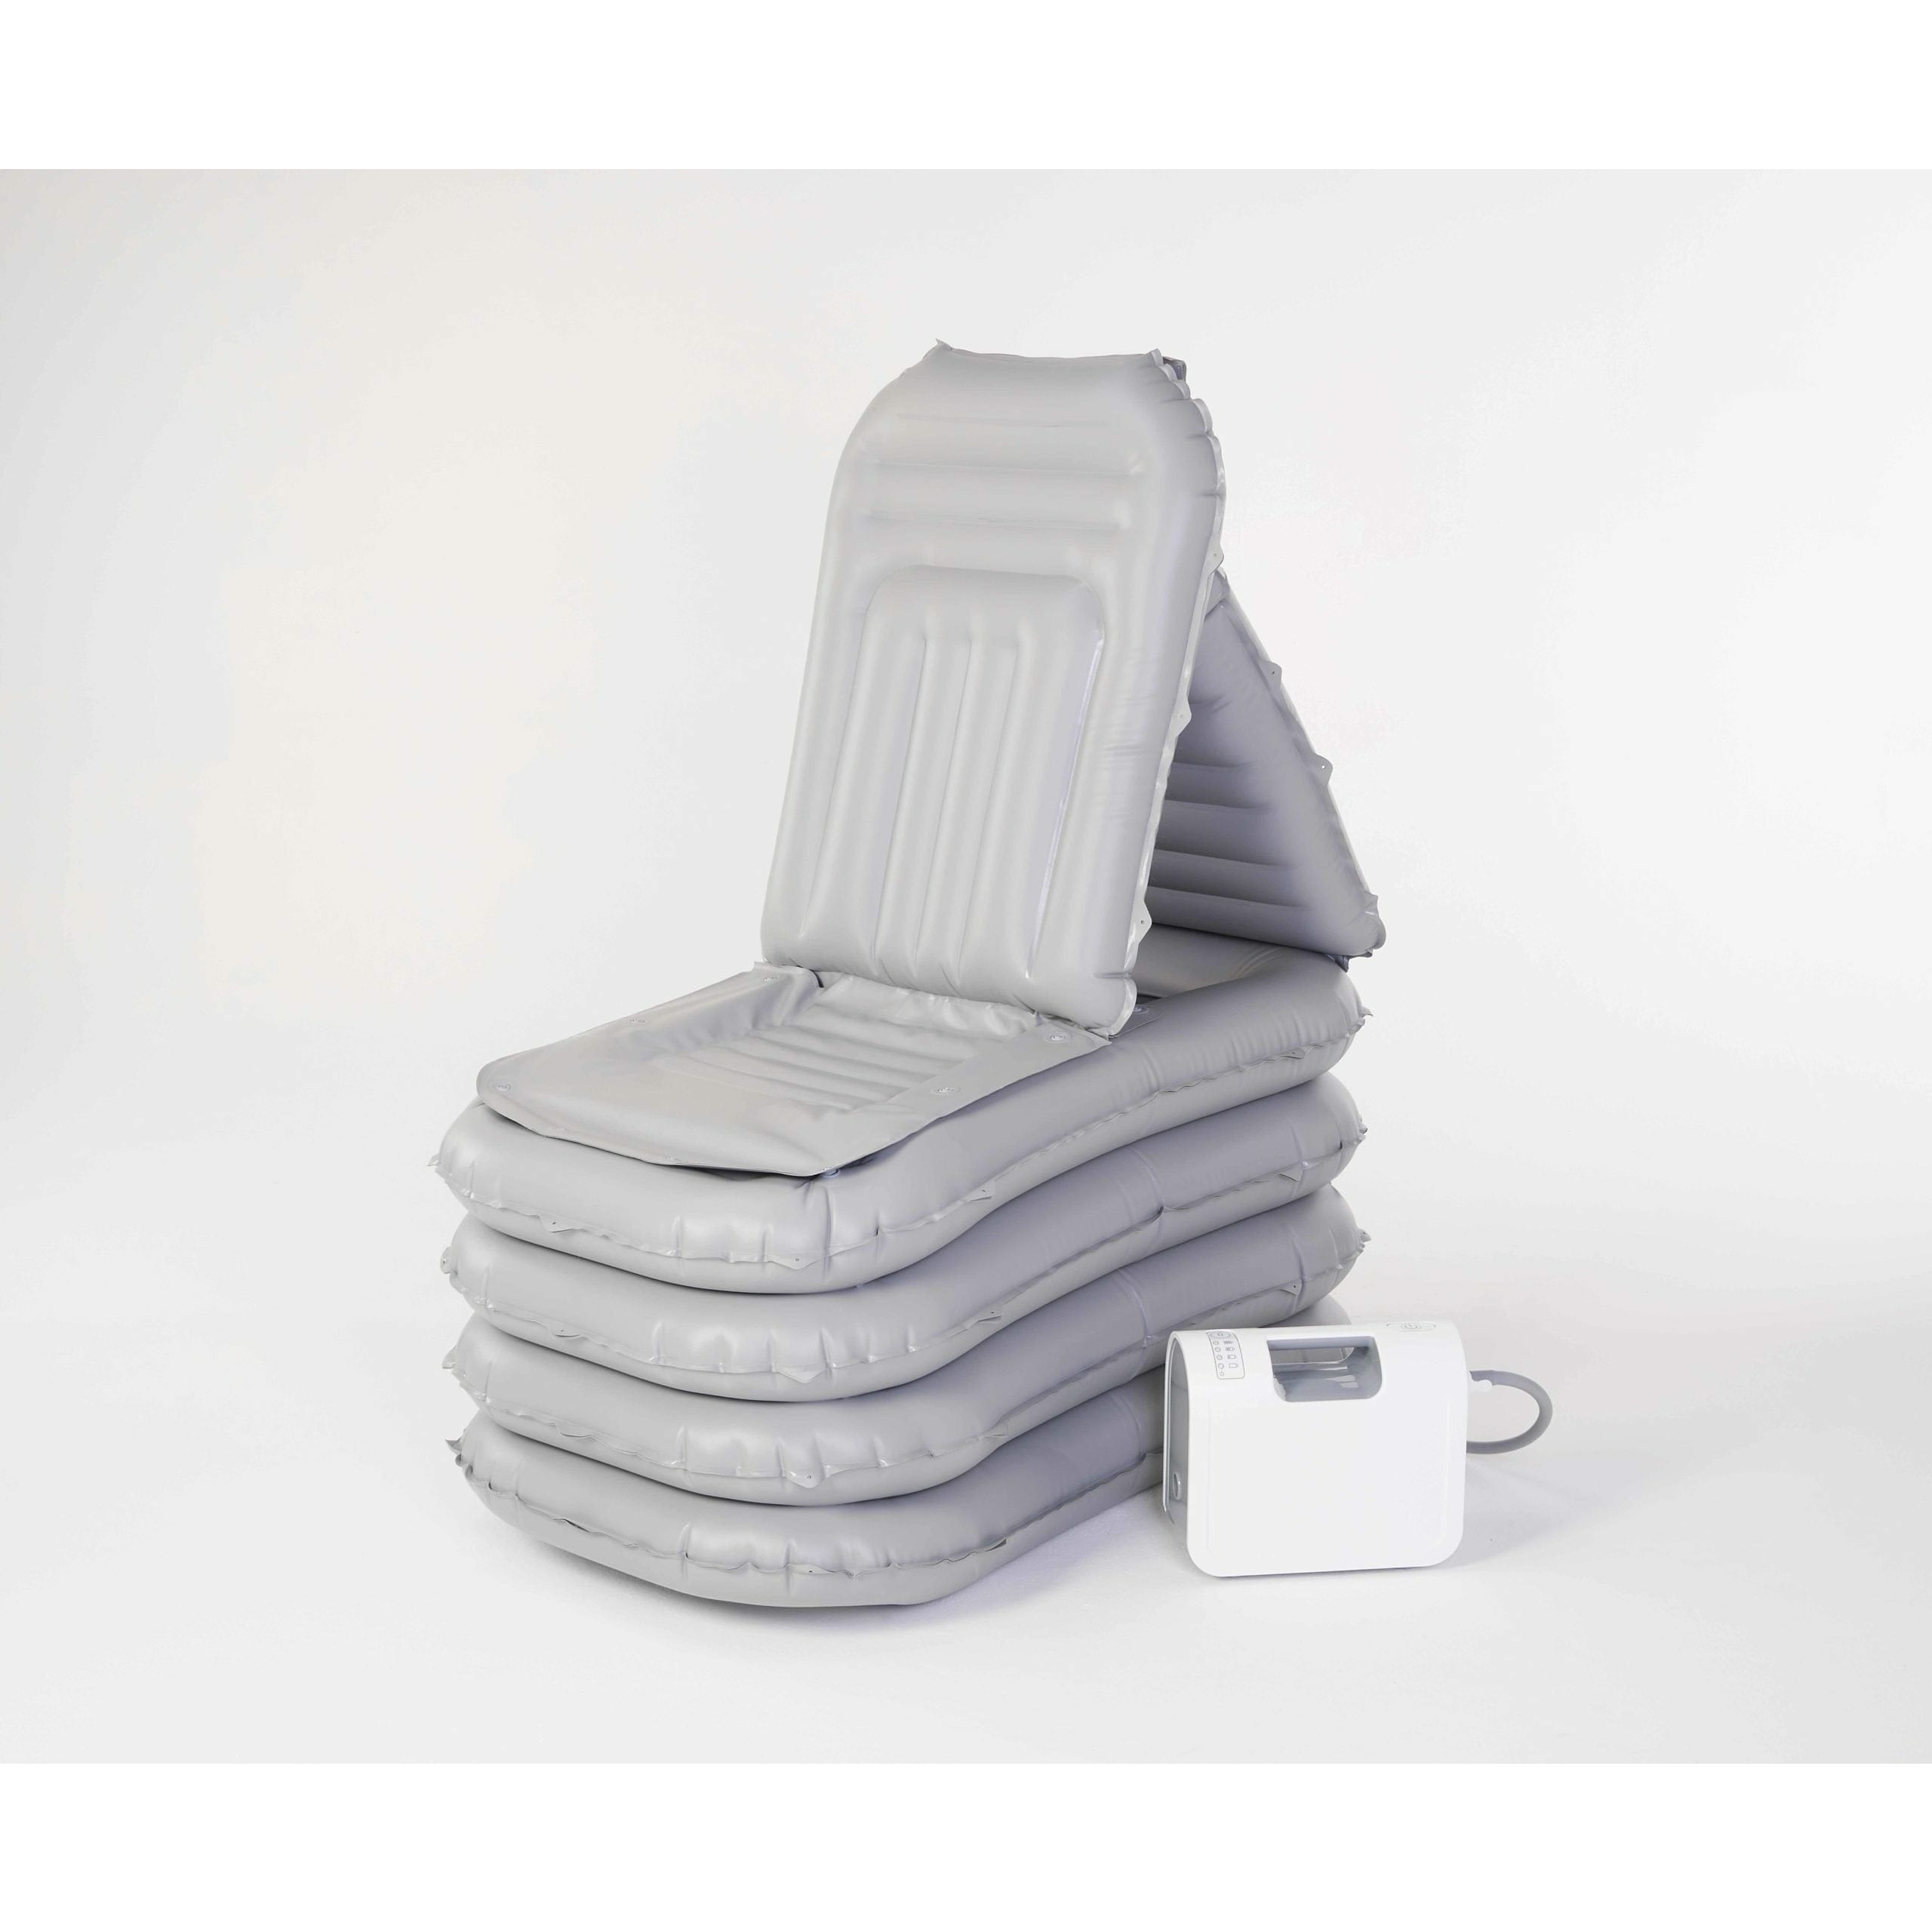 Mangar Health Eagle Inflatable Patient Lift Chair MPCA210400